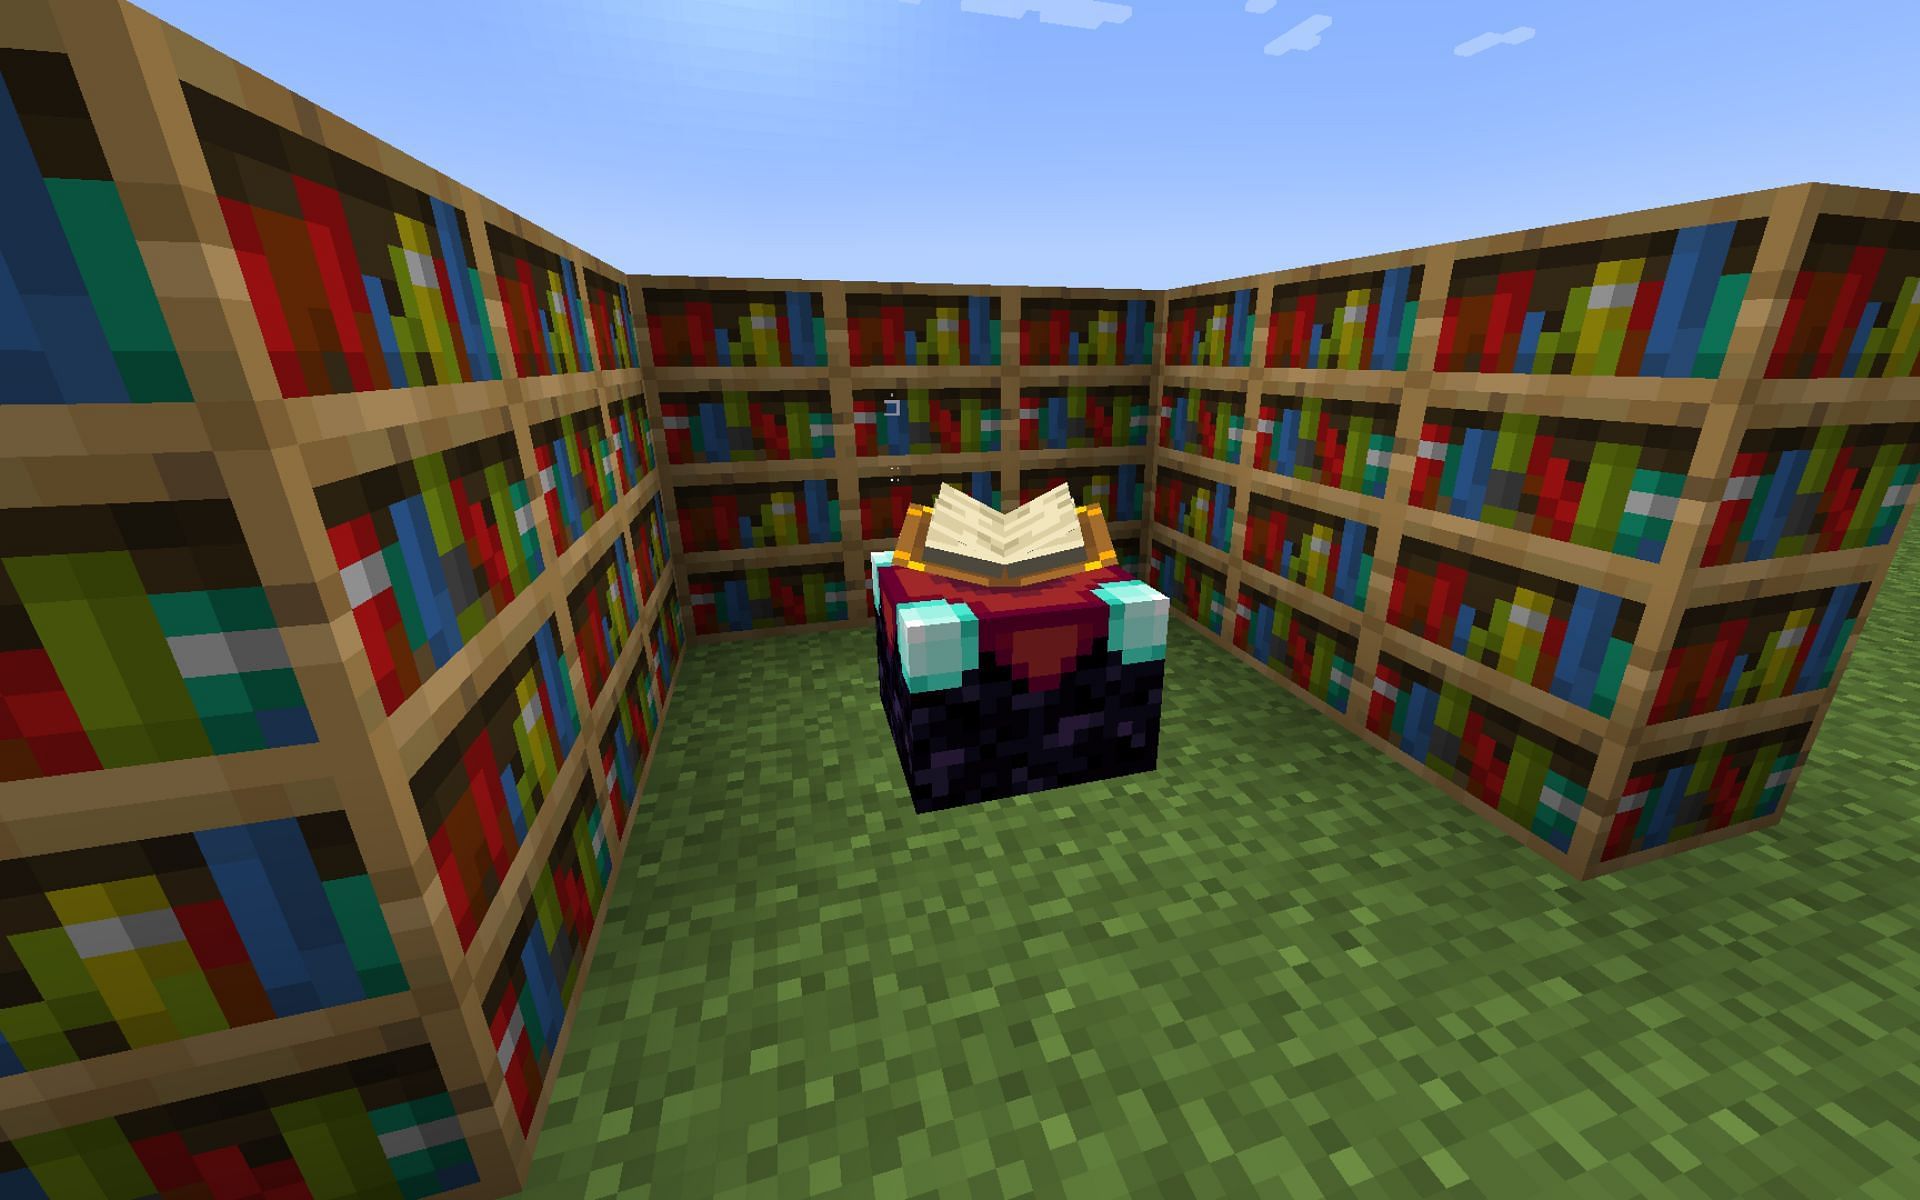 Breach is a rare enchantment found on enchanting tables as well as books (Image via Mojang Studios)